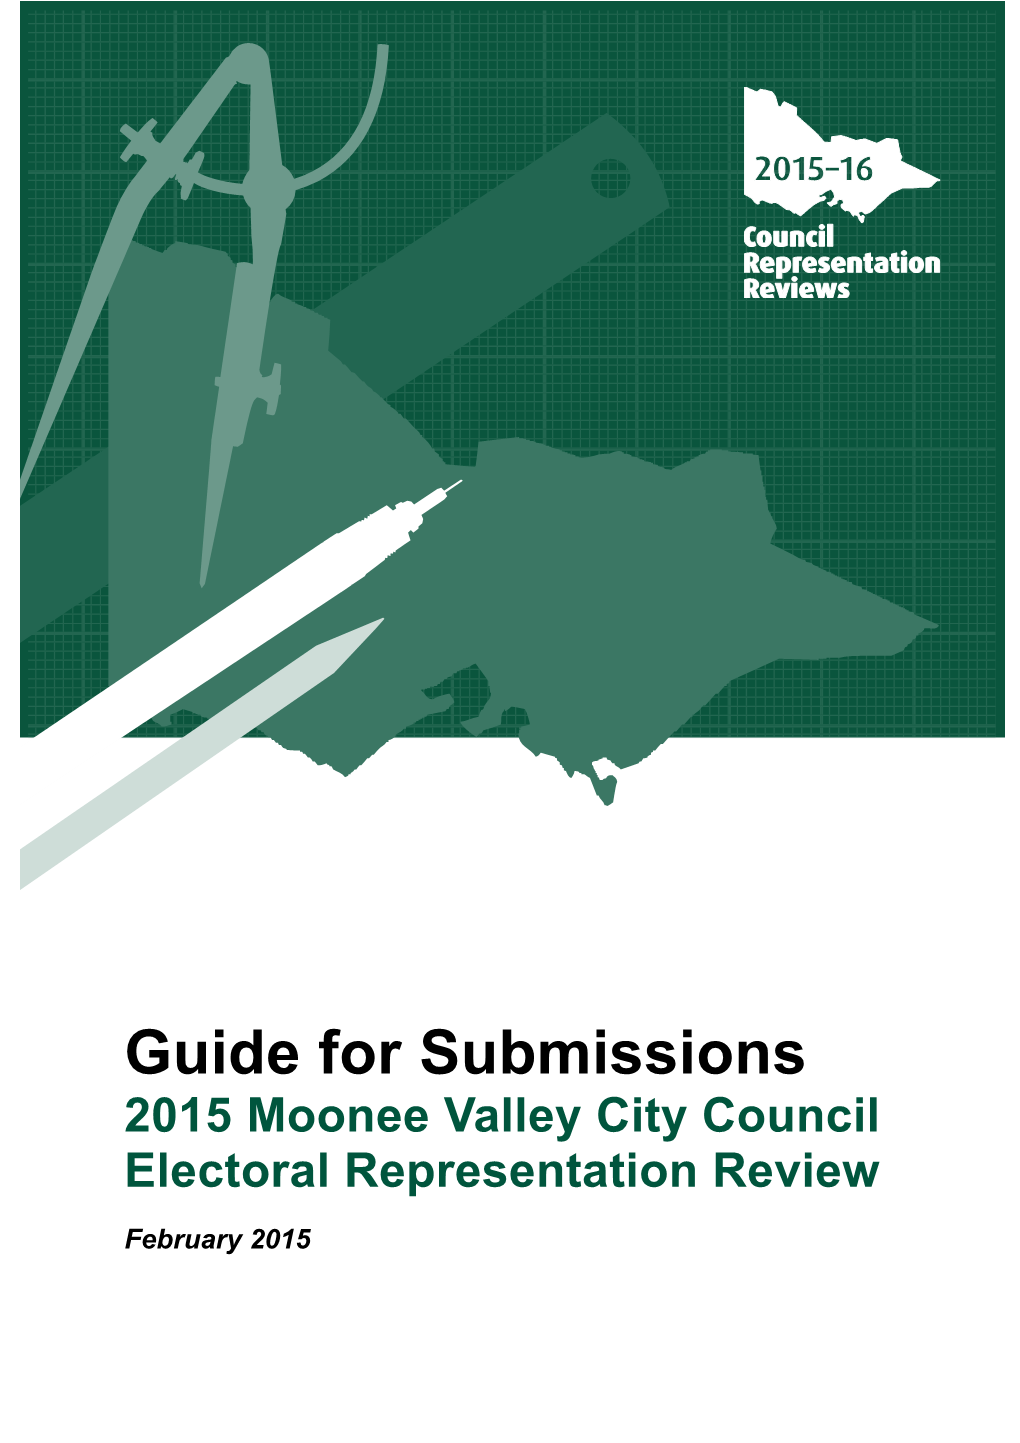 Guide for Submissions: 2015 Moonee Valley City Council Electoral Representation Review